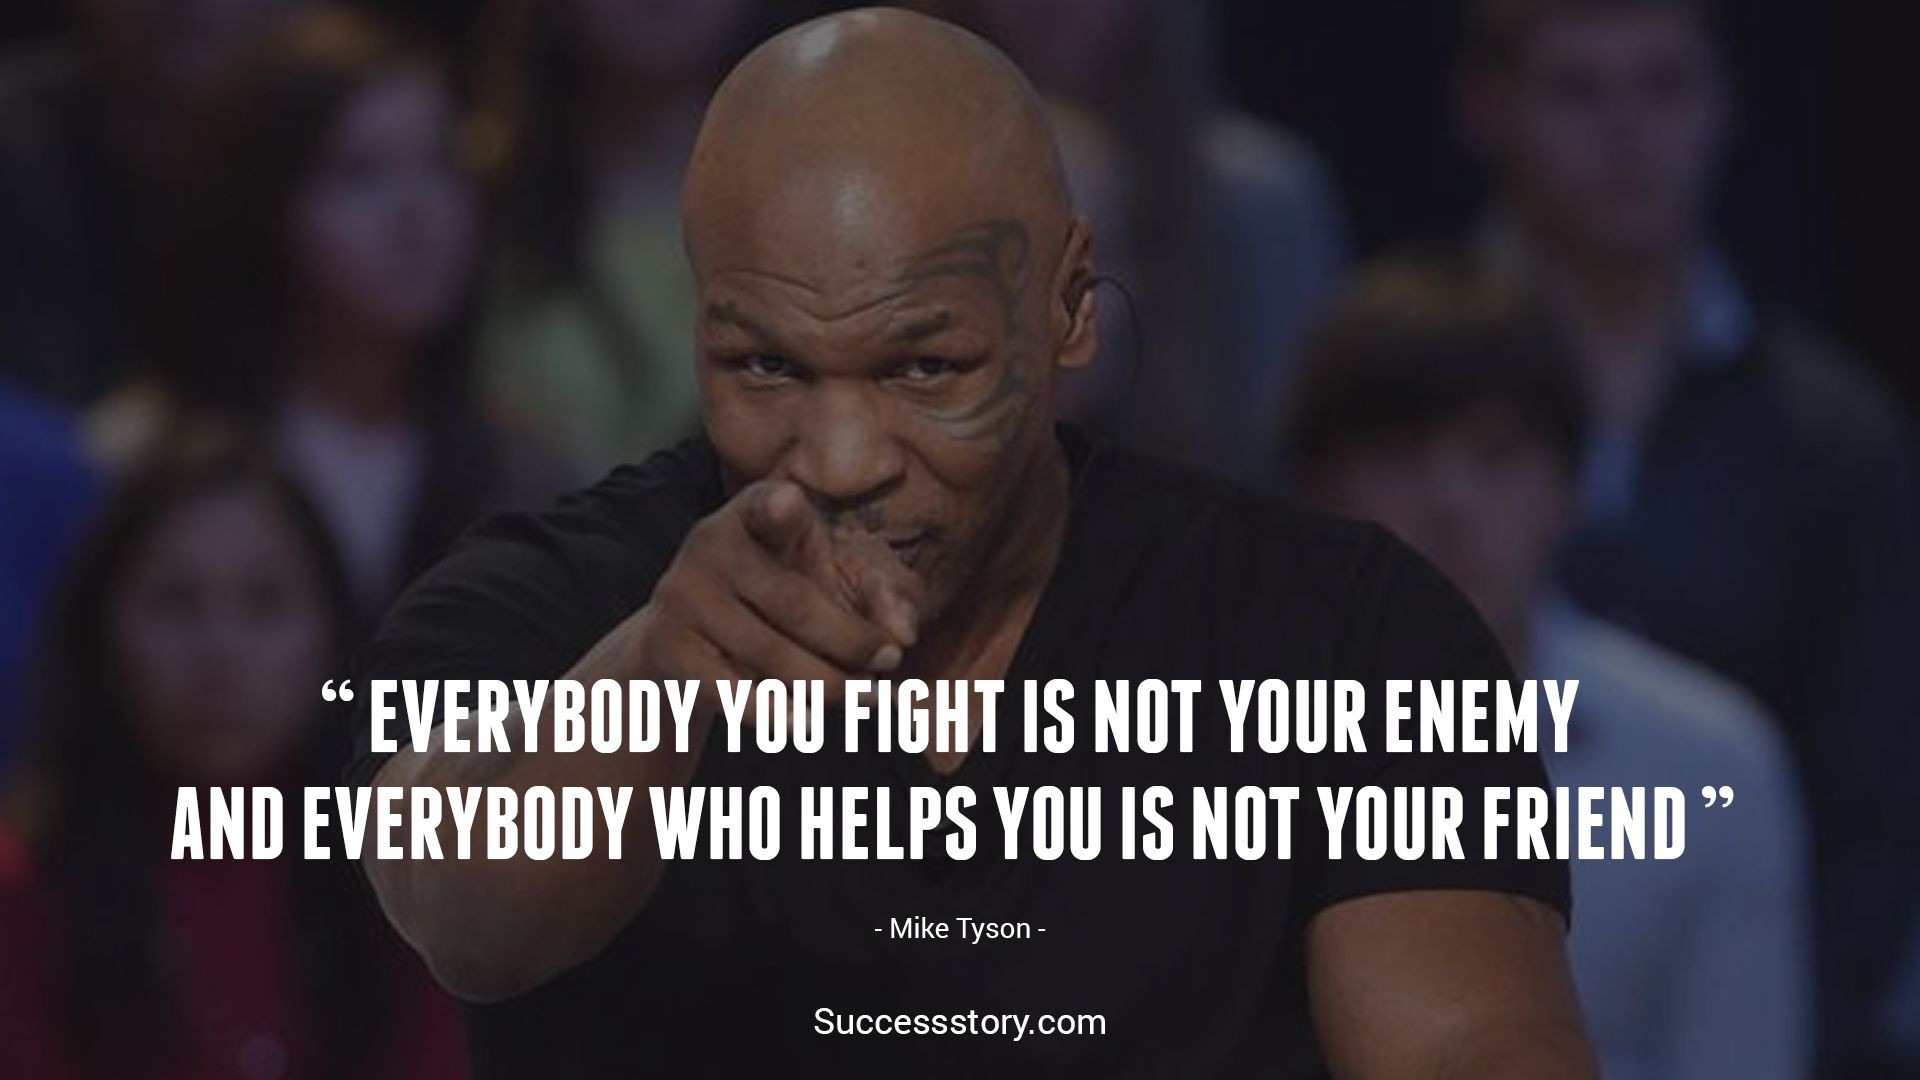 Everyone who likes. Mike Tyson quotes. Цитаты Тайсона. Mike Tyson's цитаты. Цитаты Майкла Тайсона.